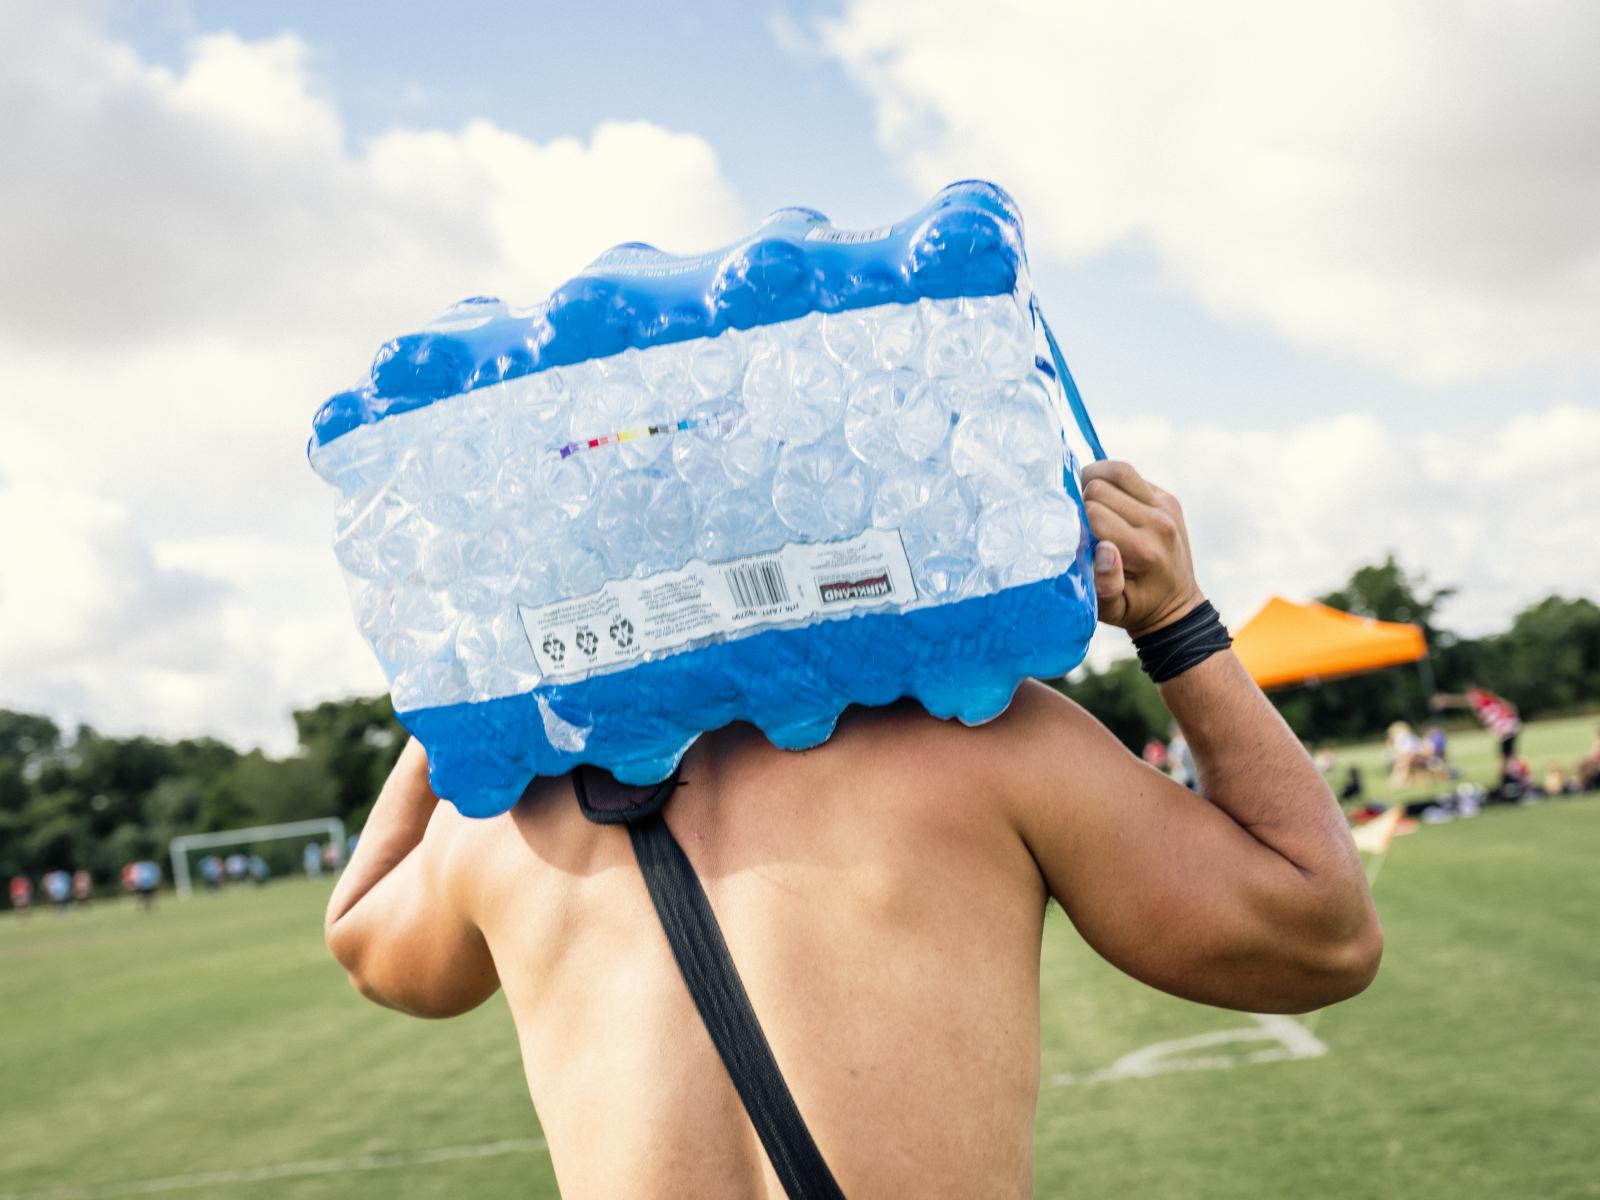  Sergio Palacios, 35, carries a...mperature reached 101 degrees. 